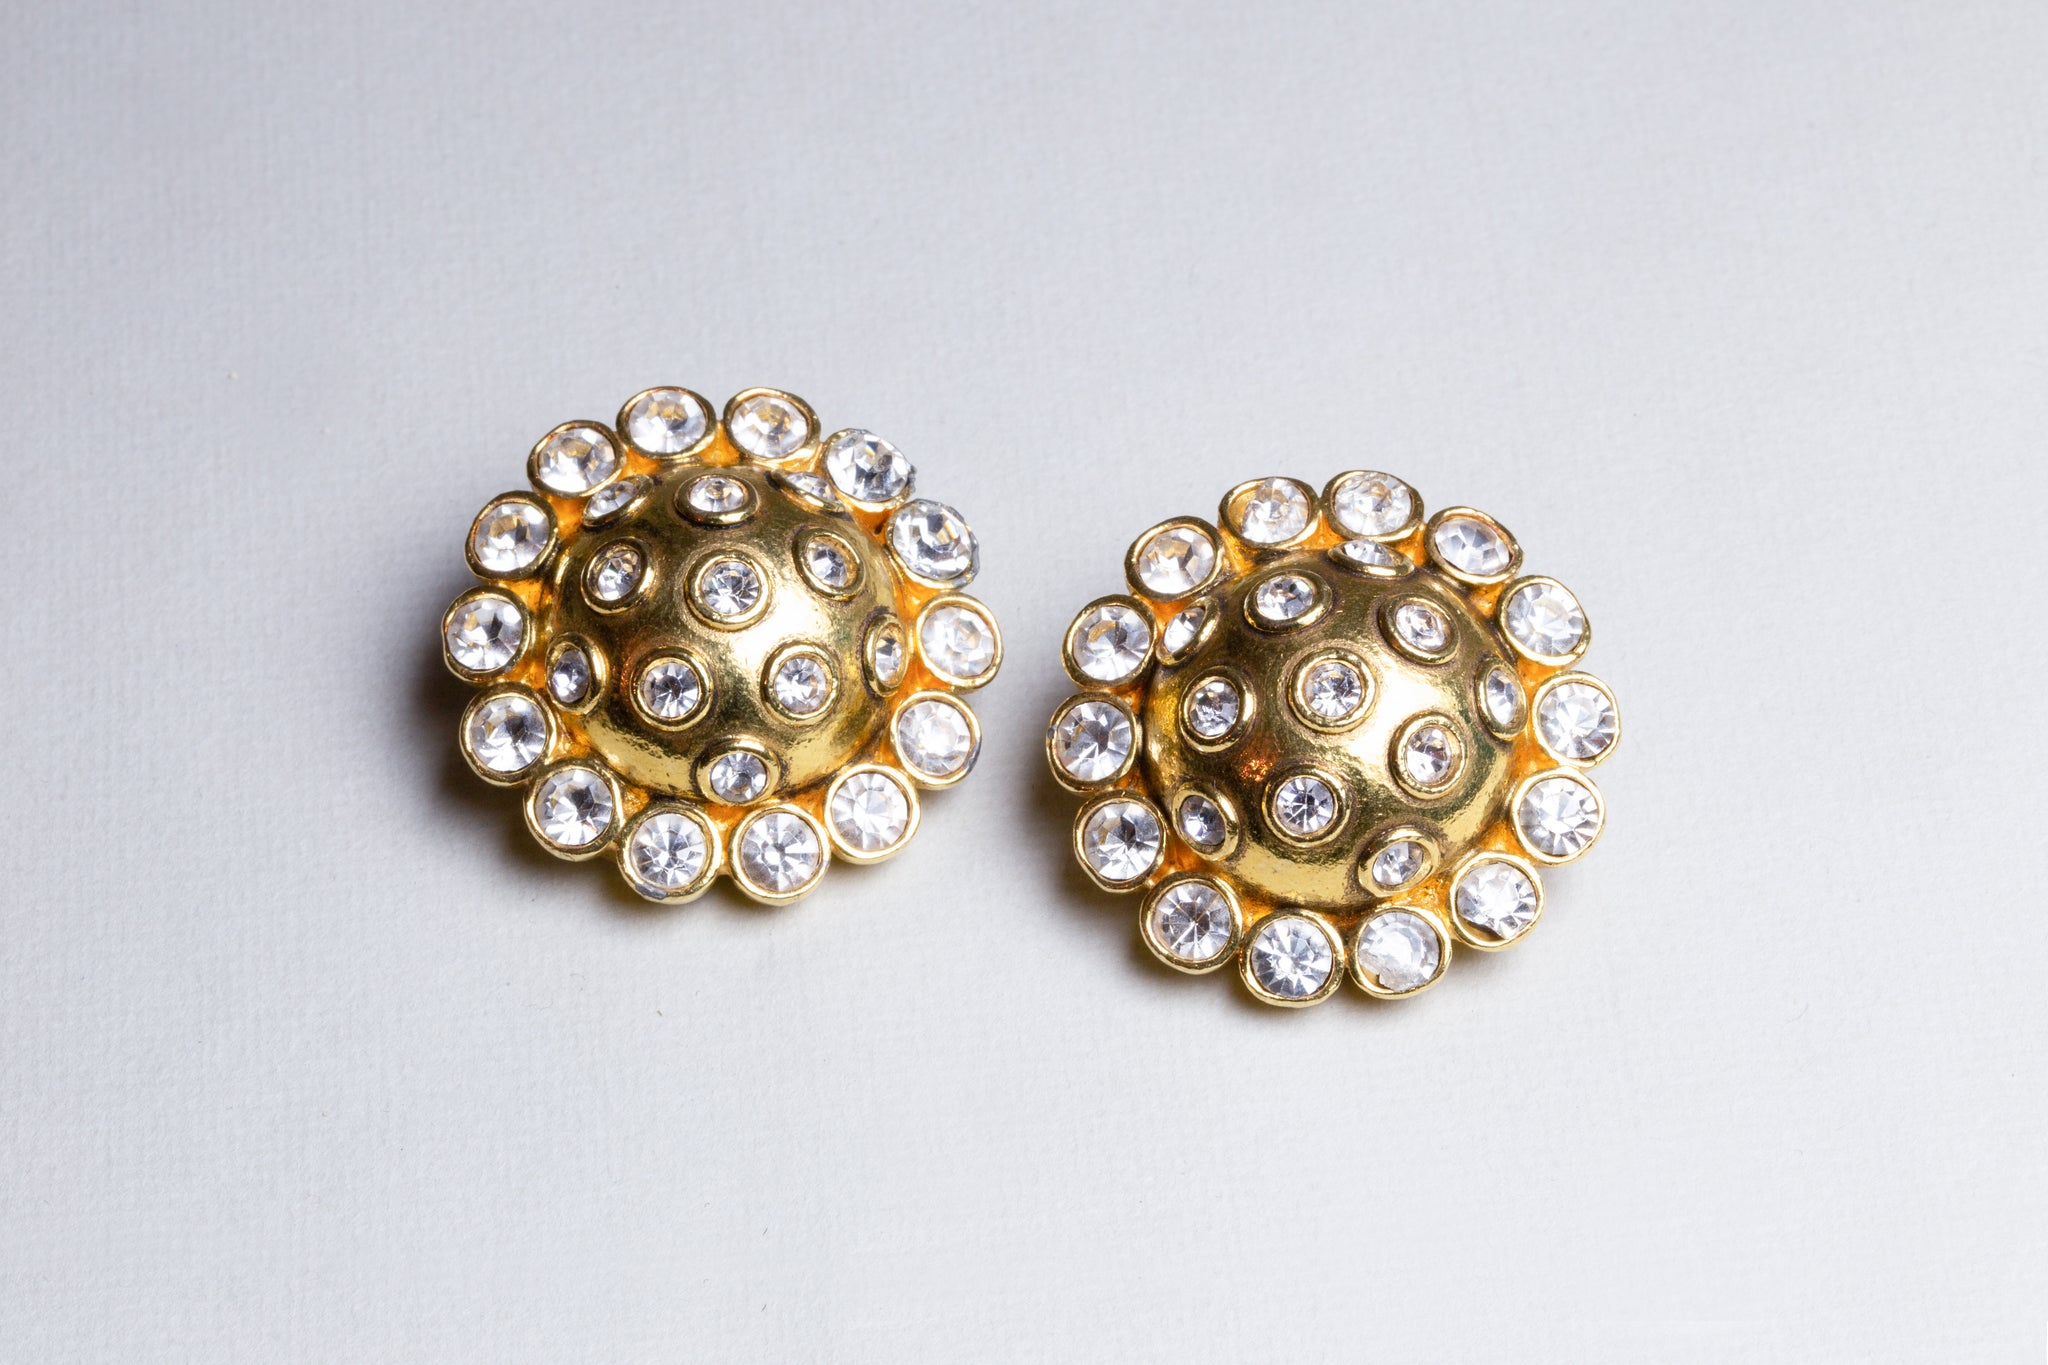 Vintage Chanel Clip-ons Earrings with Crystals - felt